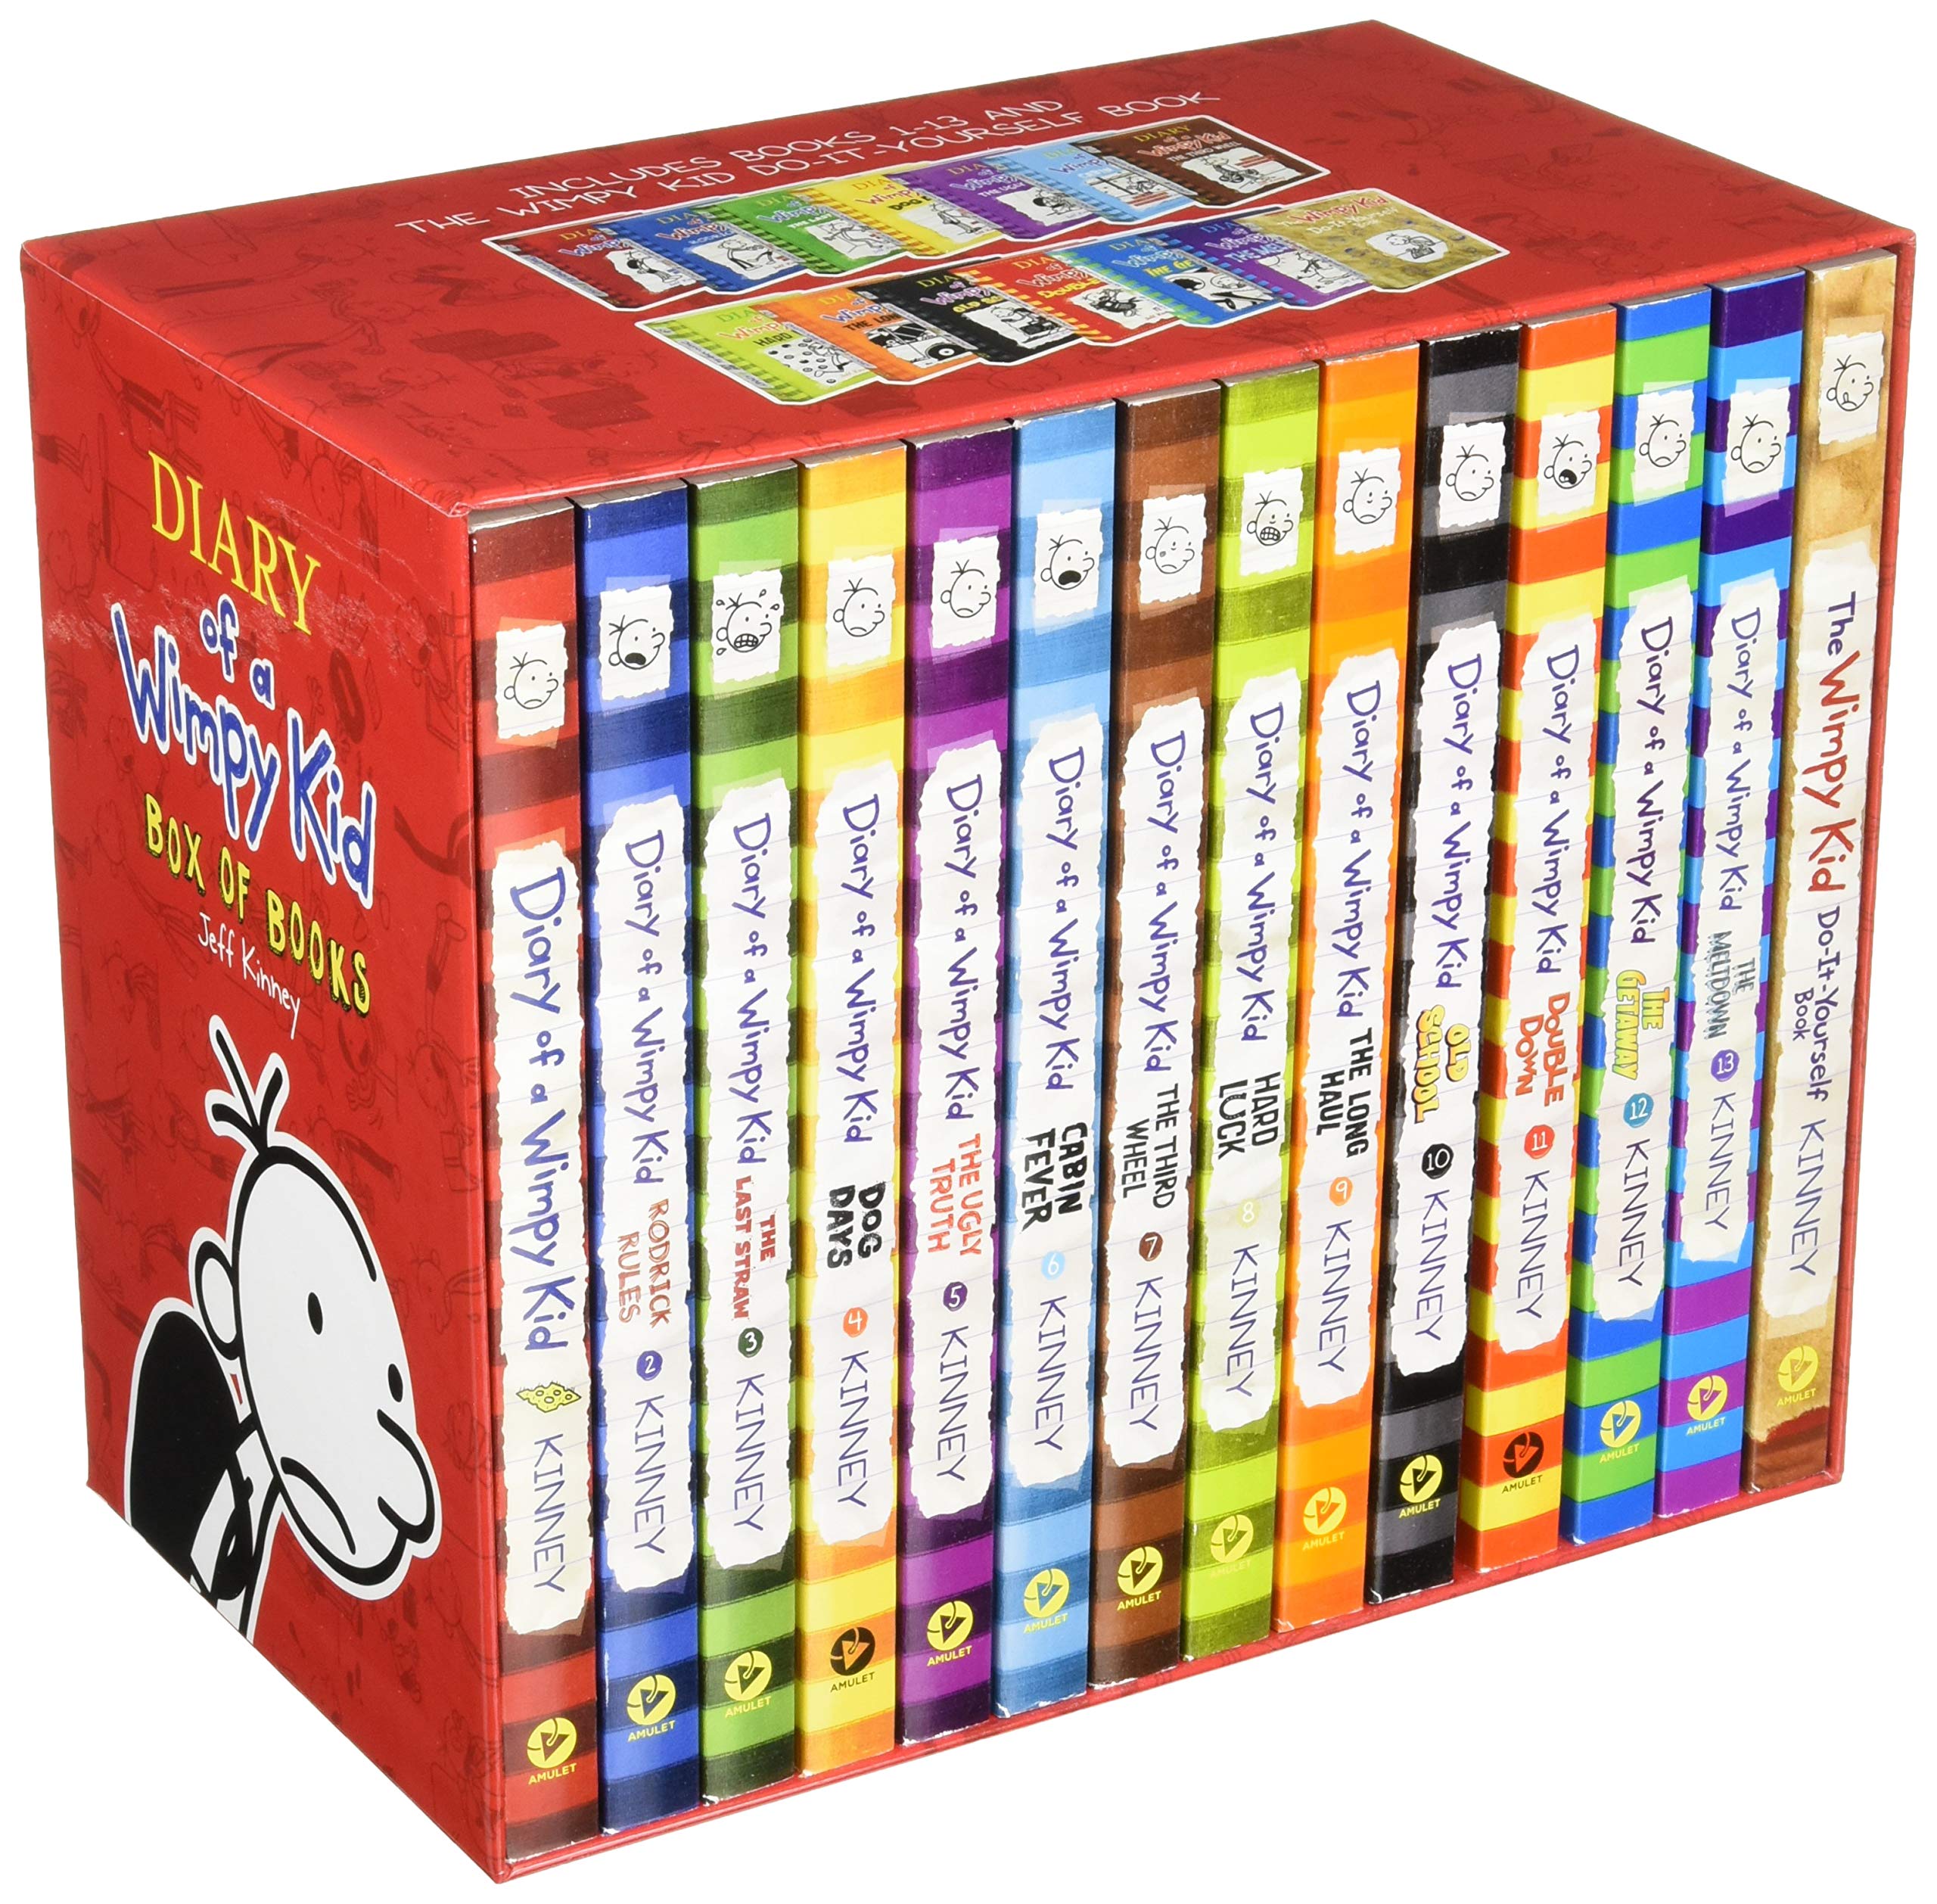 diary-of-a-wimpy-kid-books-in-order-1-13-qbooksz